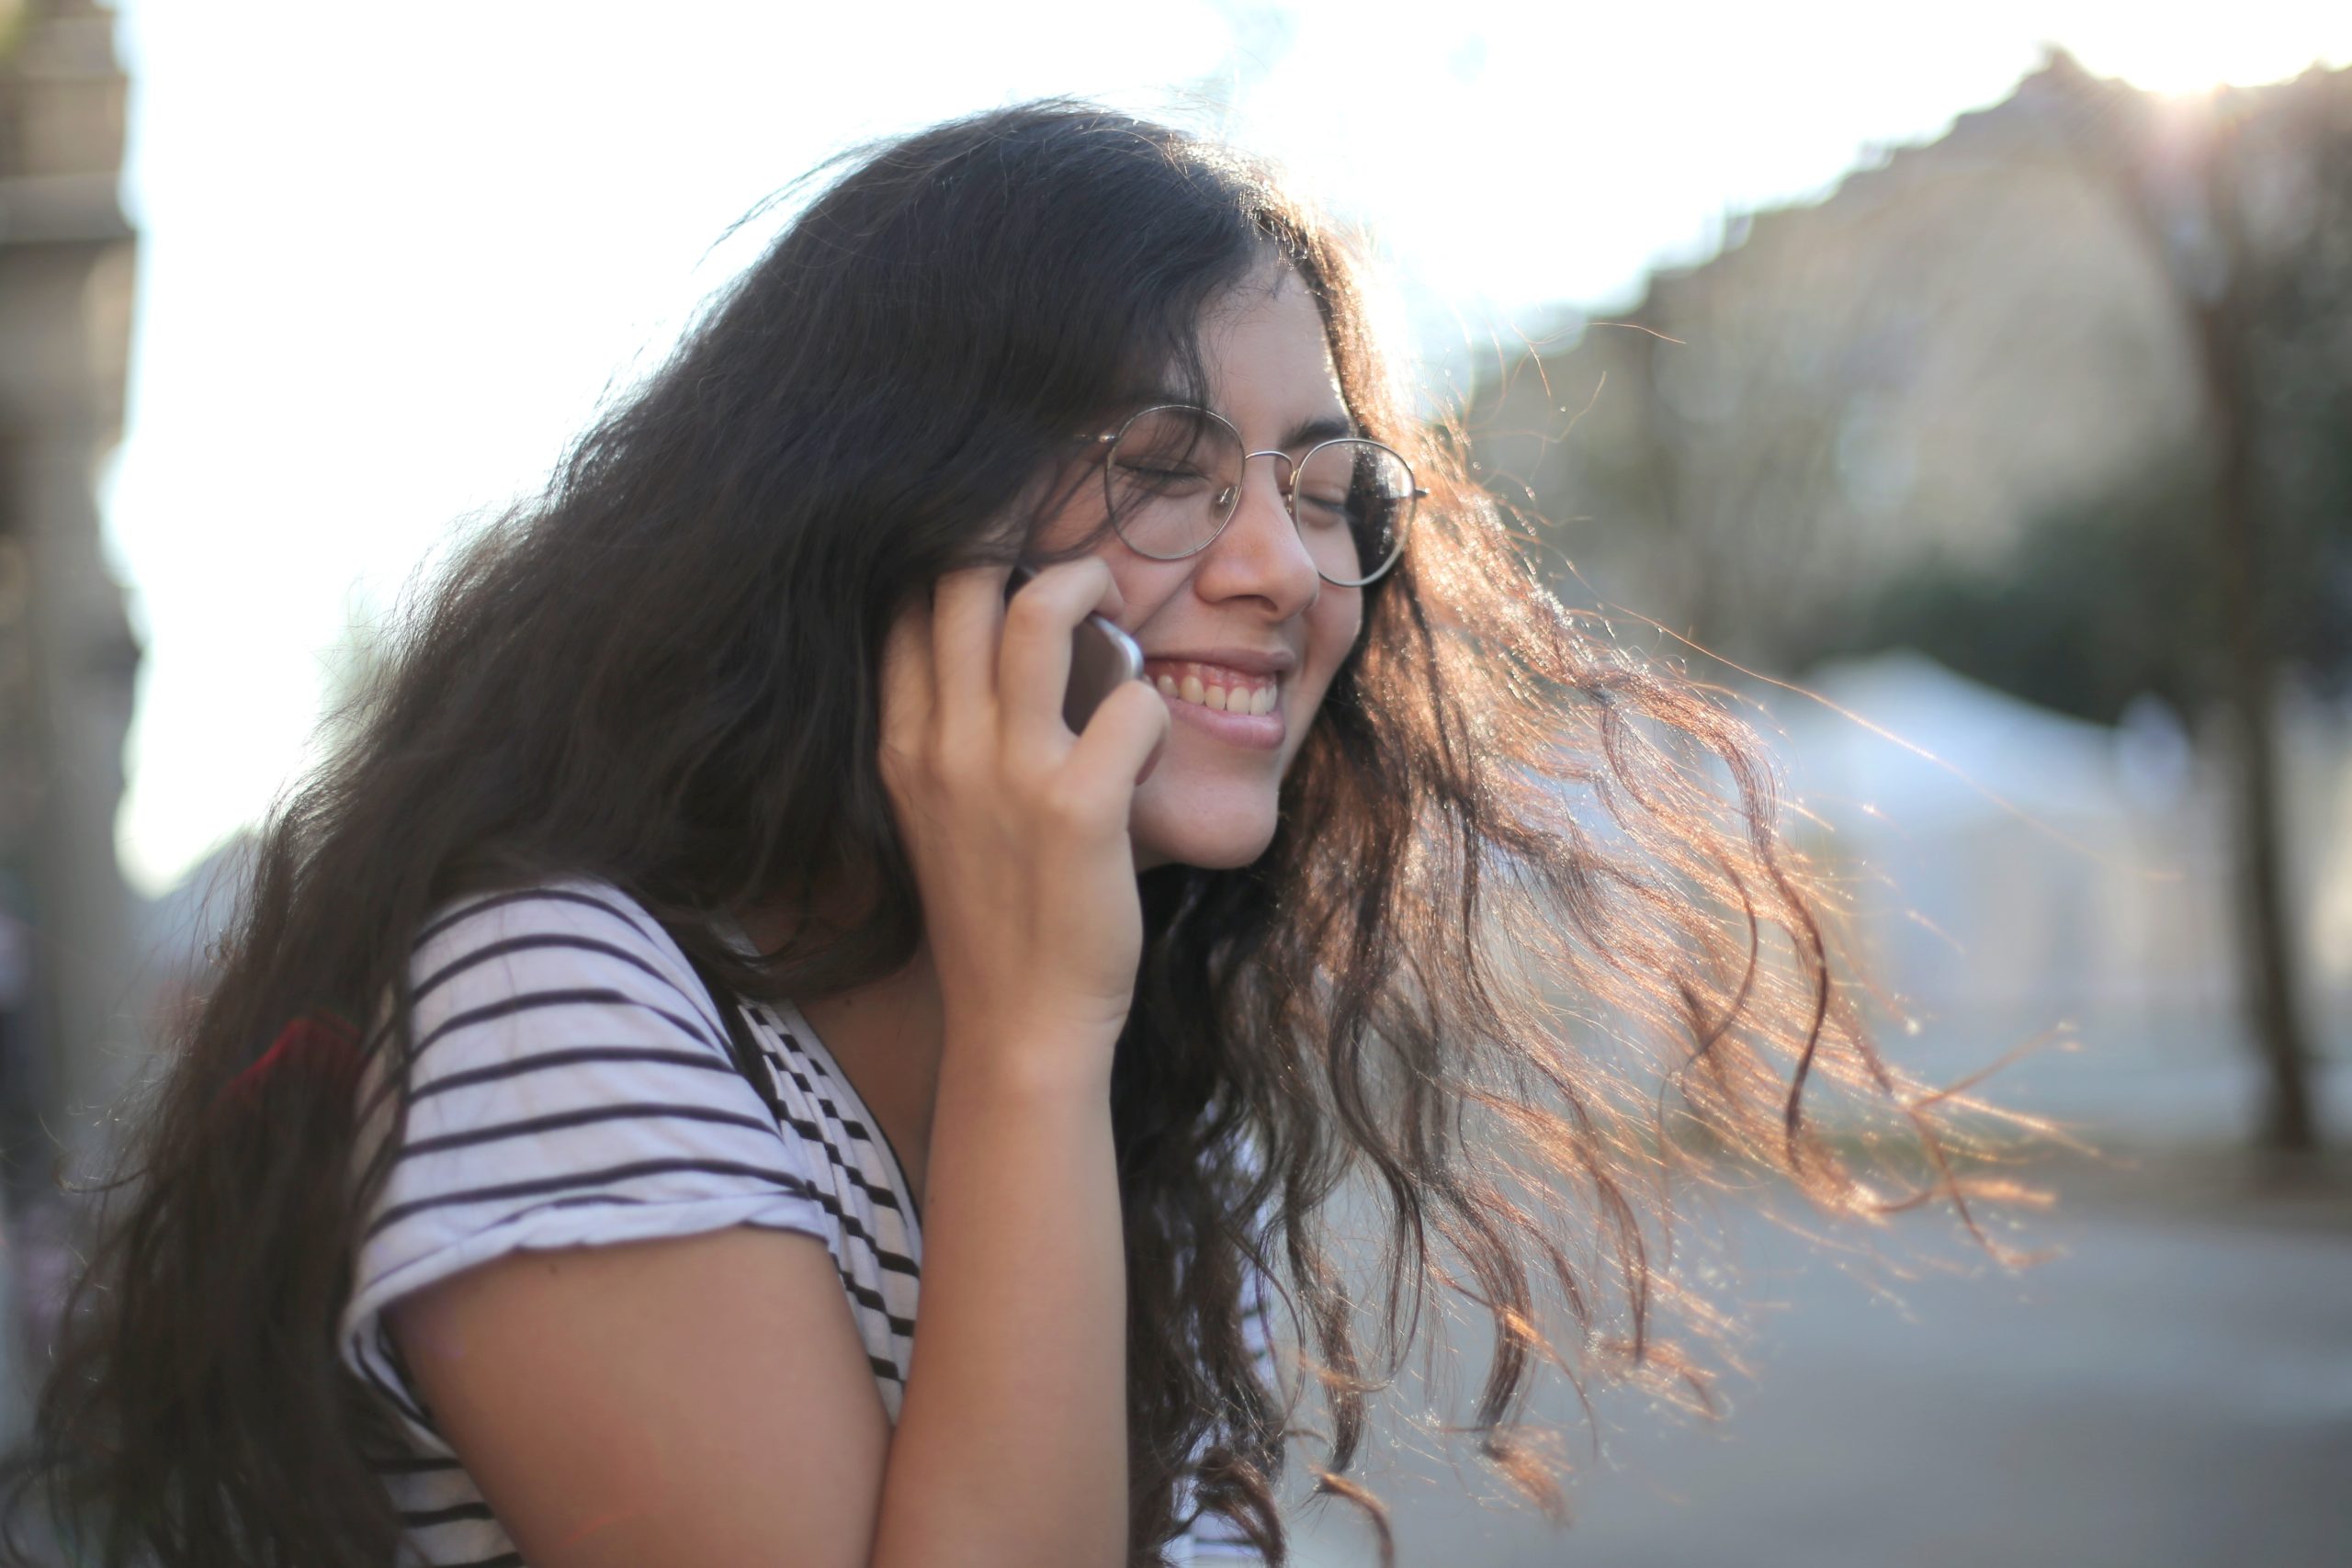 A girl smiling as she speaks on the phone.